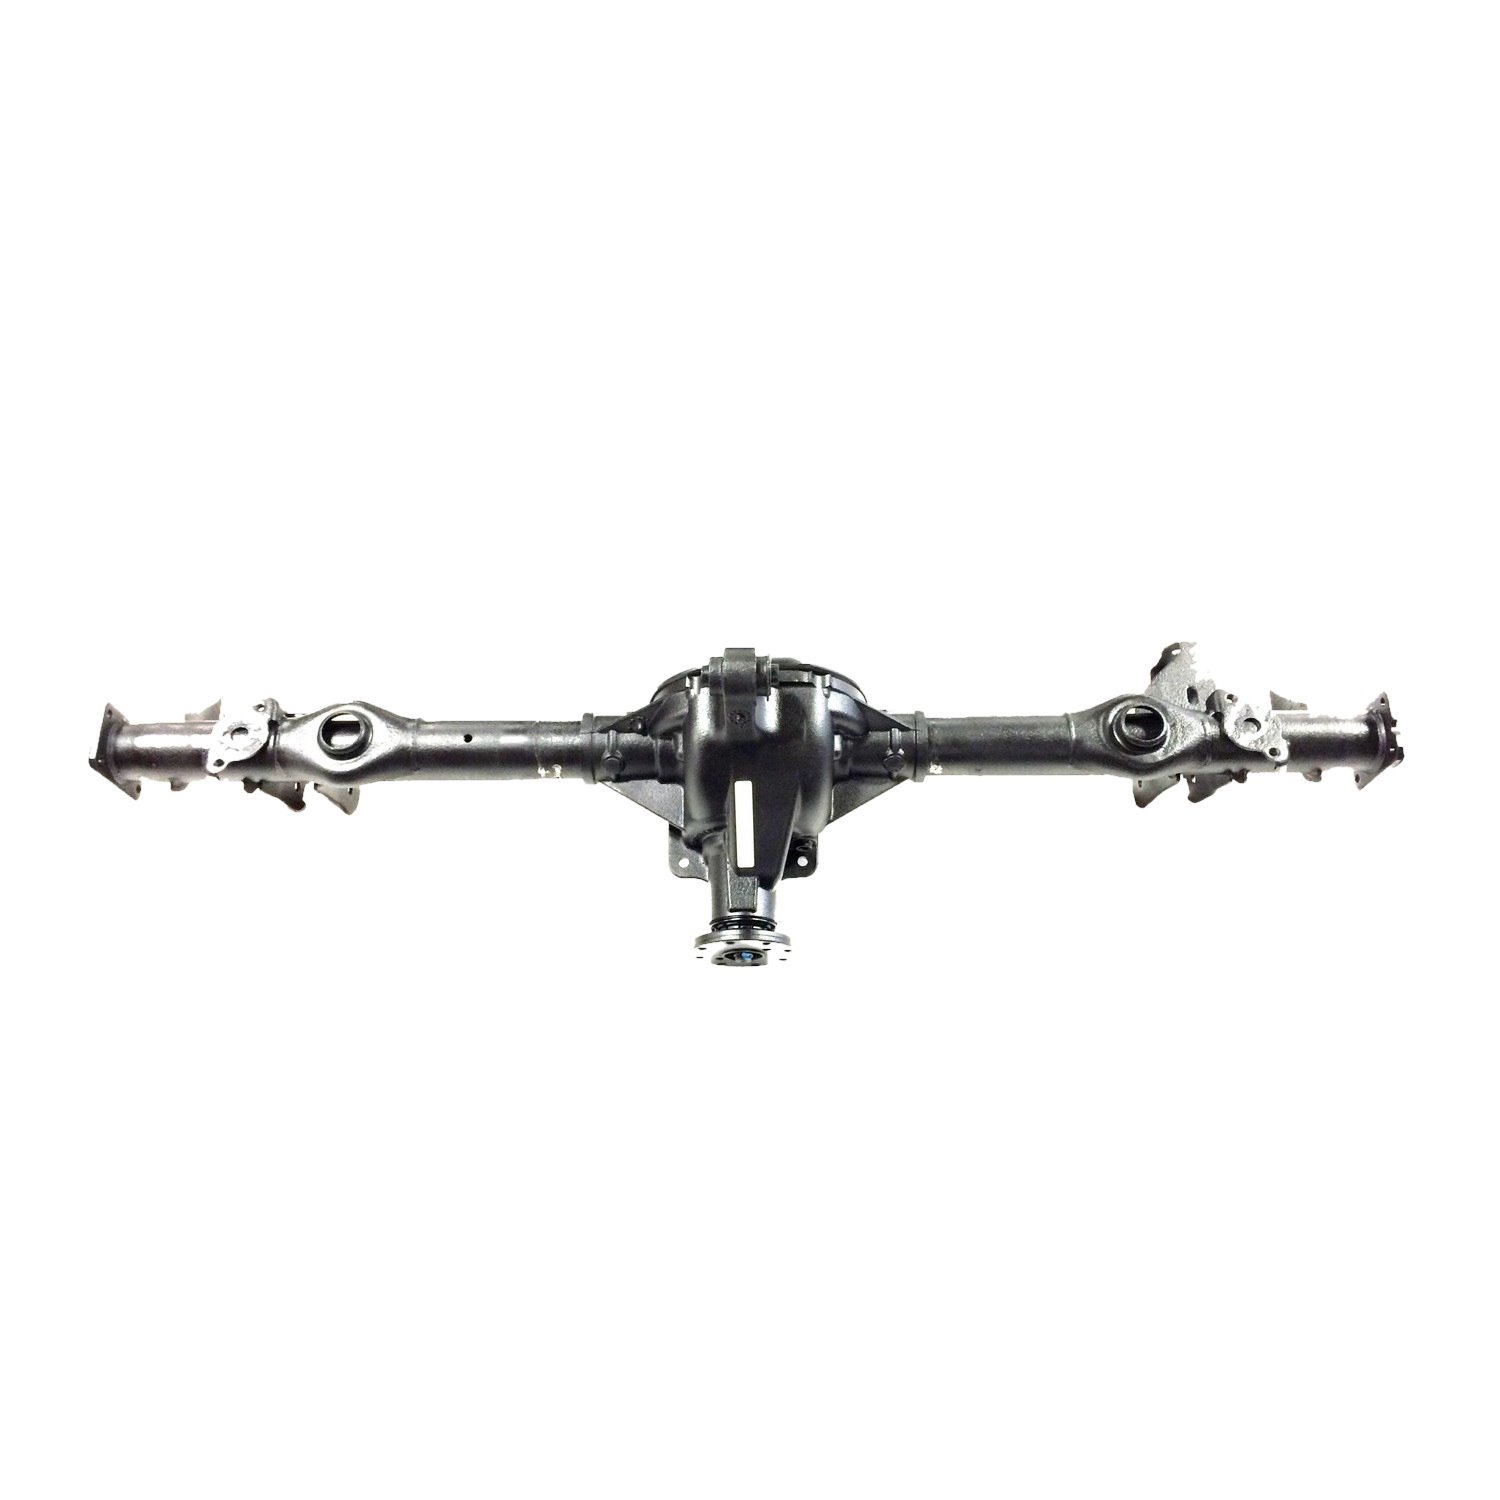 Remanufactured Axle Assy, GM 10 Bolt 8.5 In., 3.08 Ratio, w/ G80 Posi Traction